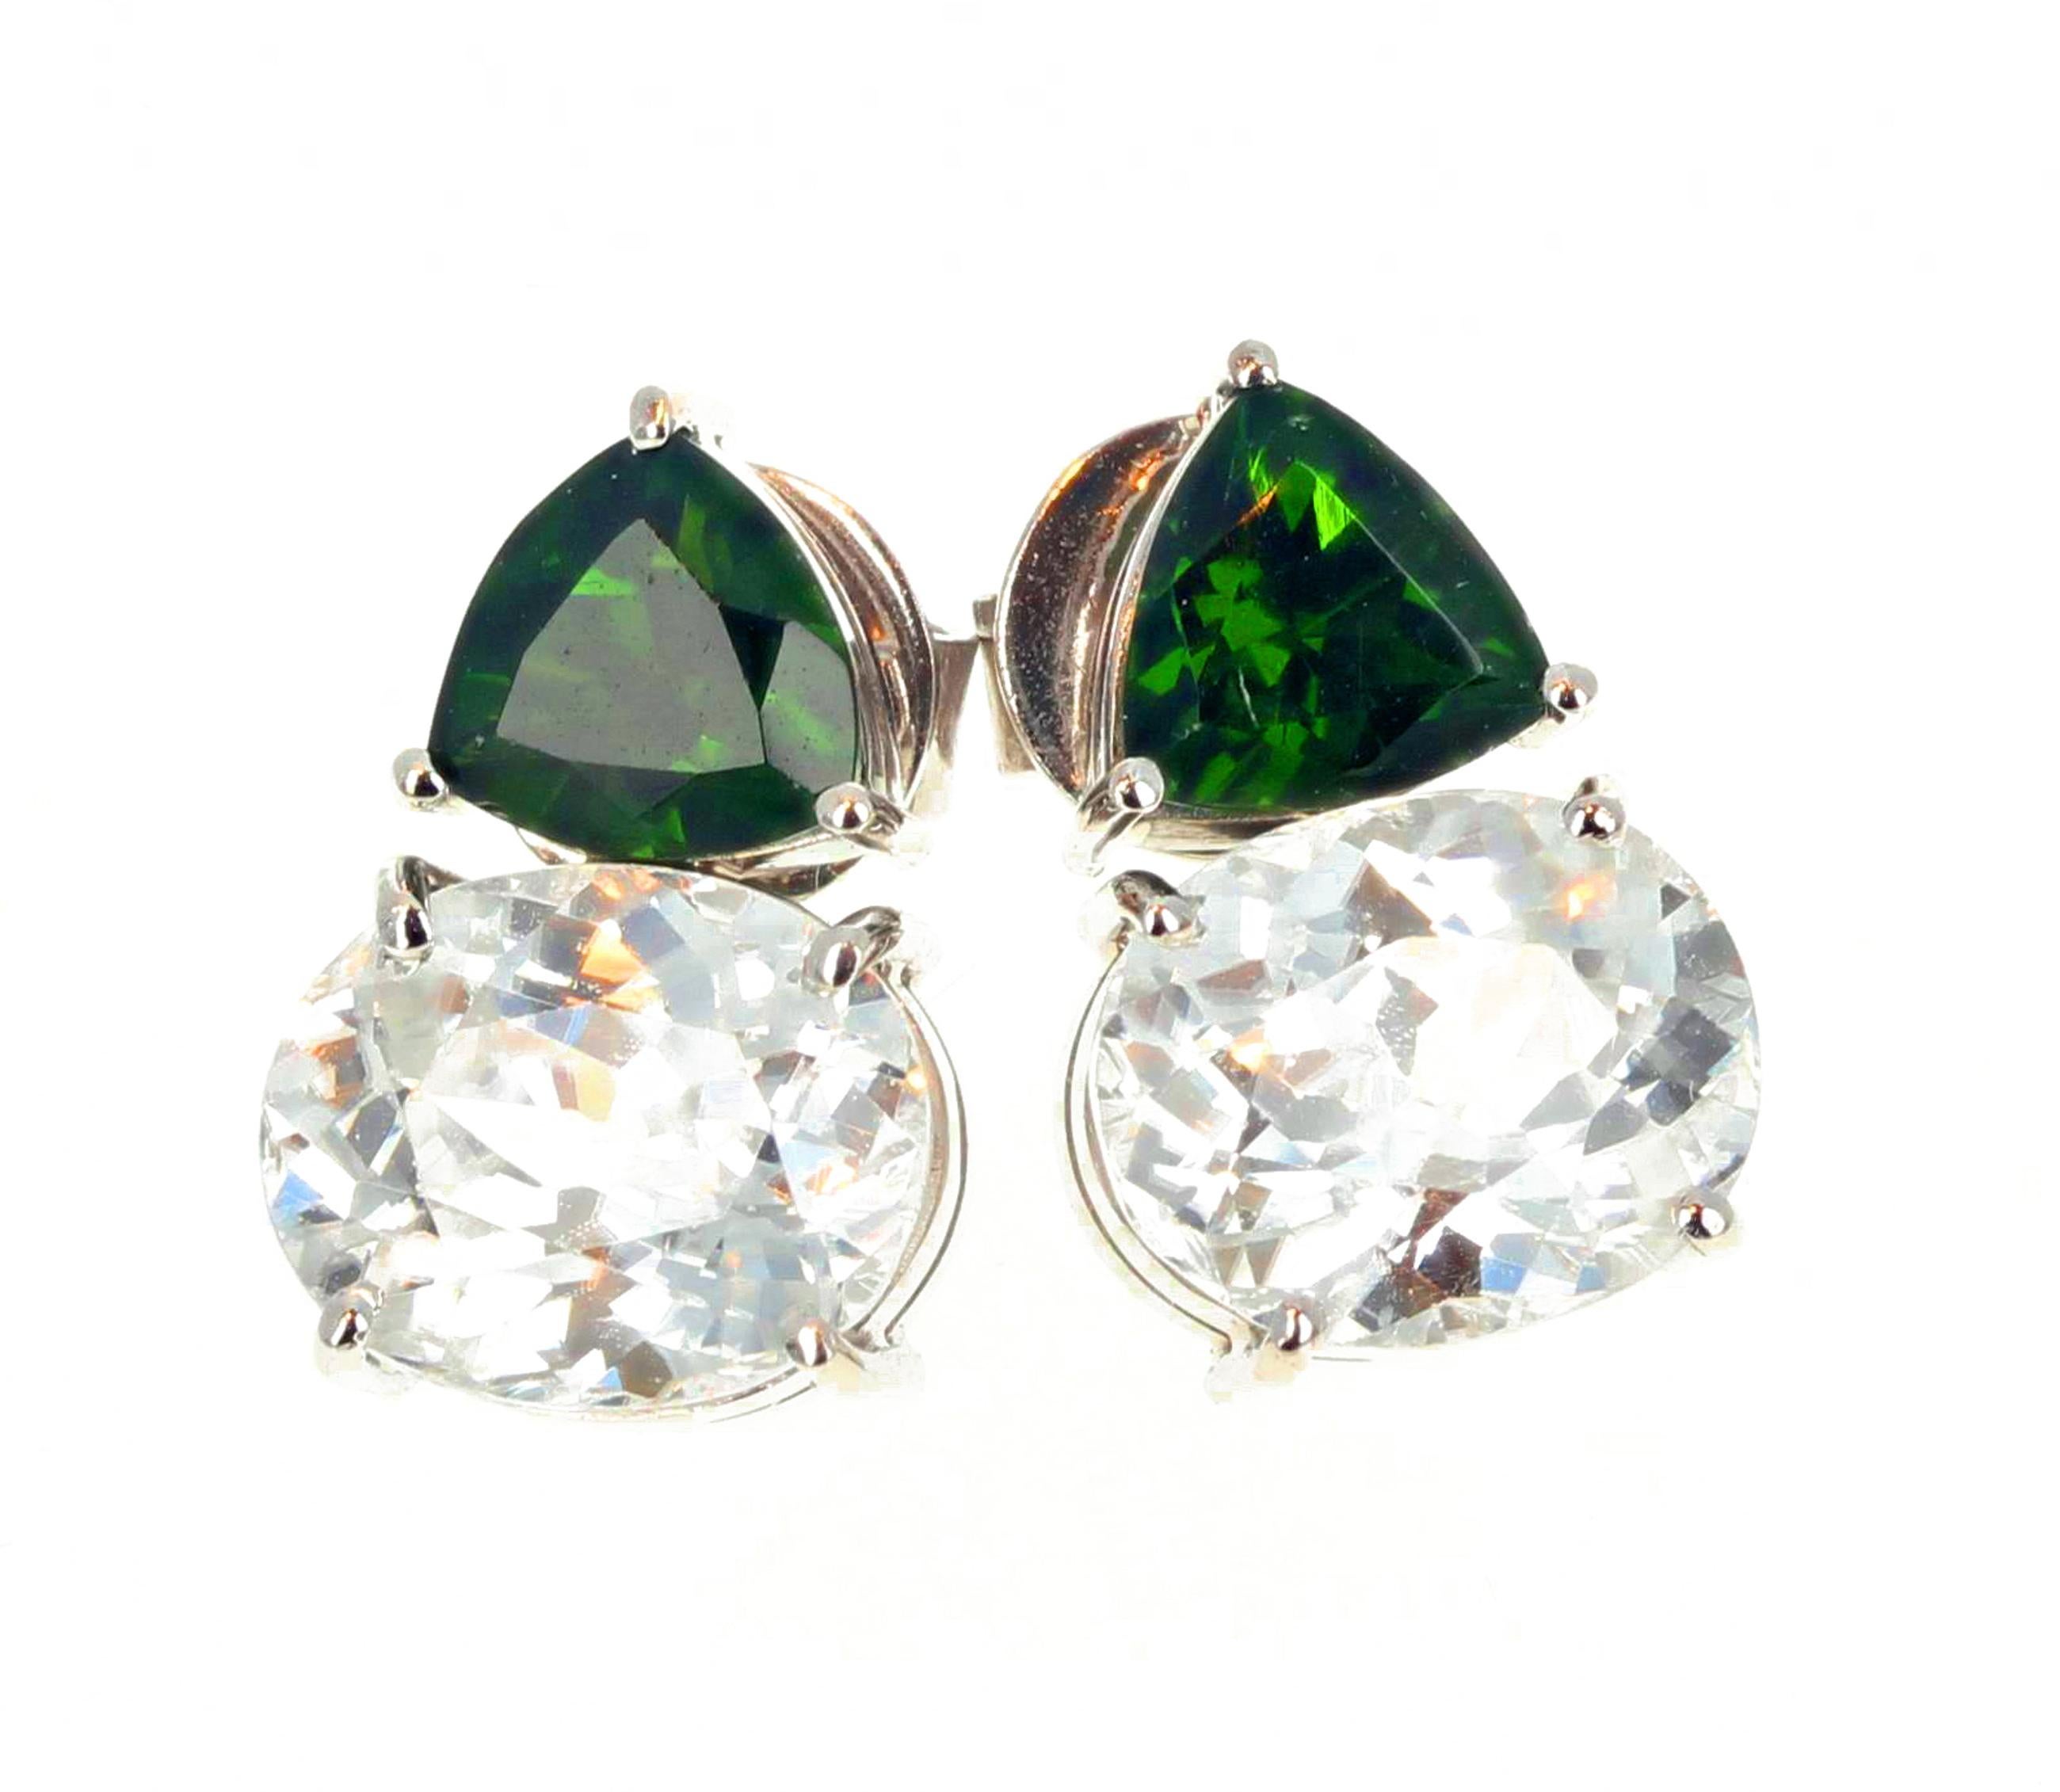 These beautiful Russian Chrome Diopsides (unique to Siberia) are approximately 1.07 carats each - 7mm x 7 mm -  and the brilliant natural real white Cambodian Zircons are 6.3 carats each - 11mm x 9 mm - all set in white gold stud earrings.  They are